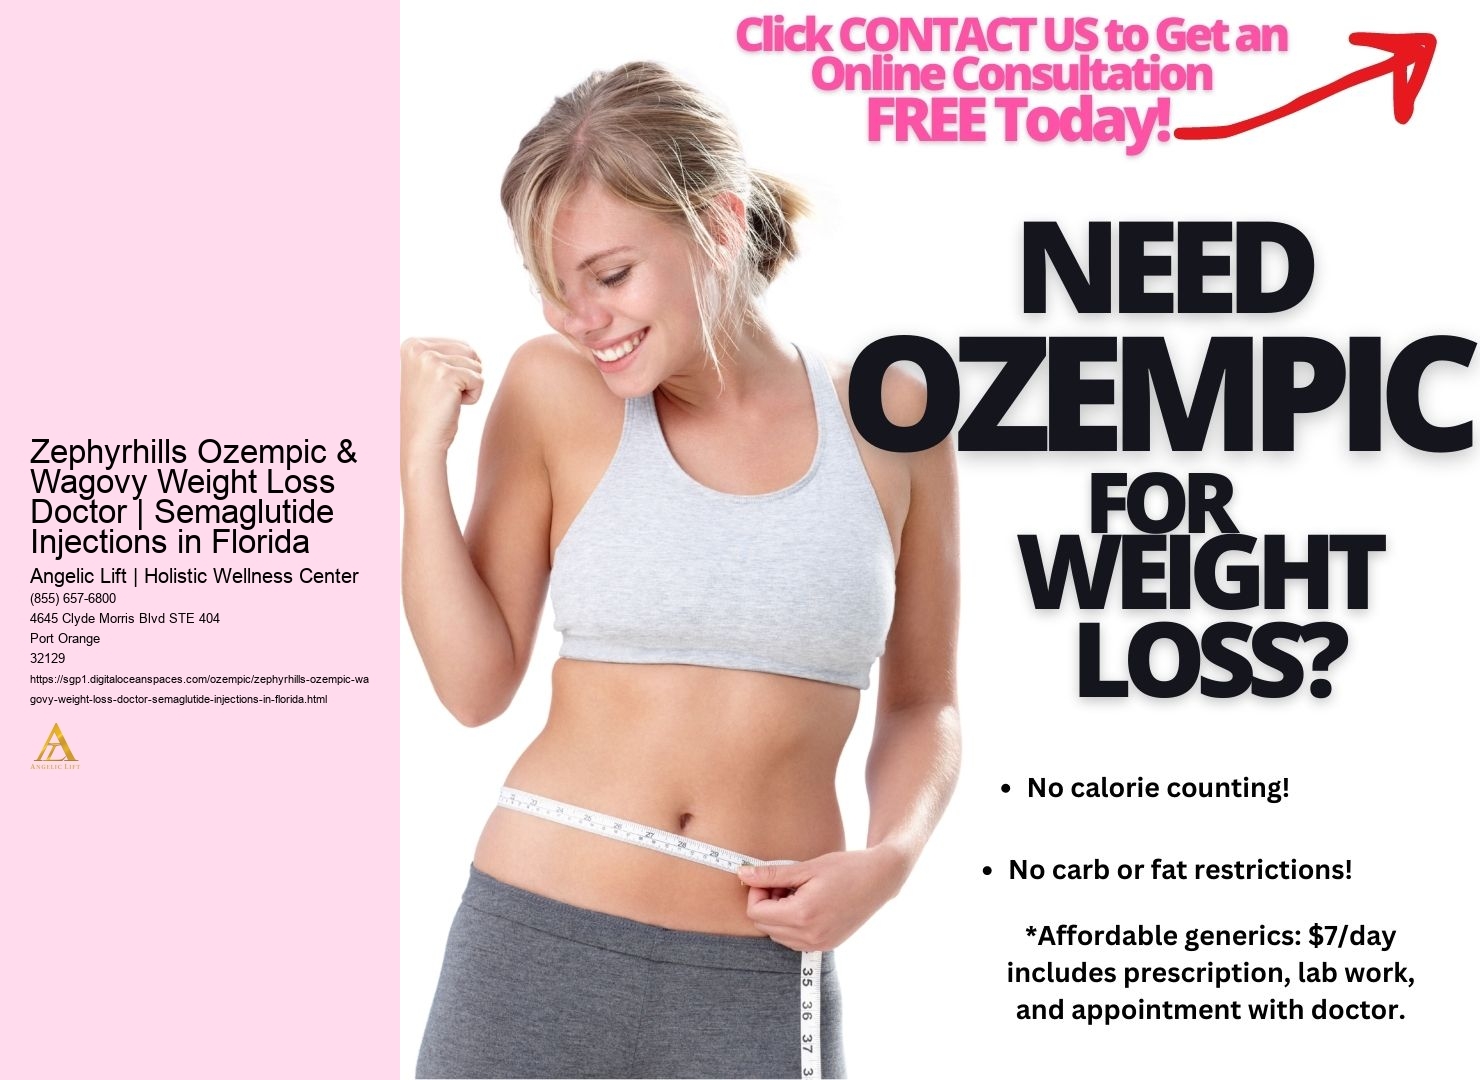 Zephyrhills Ozempic & Wagovy Weight Loss Doctor | Semaglutide Injections in Florida